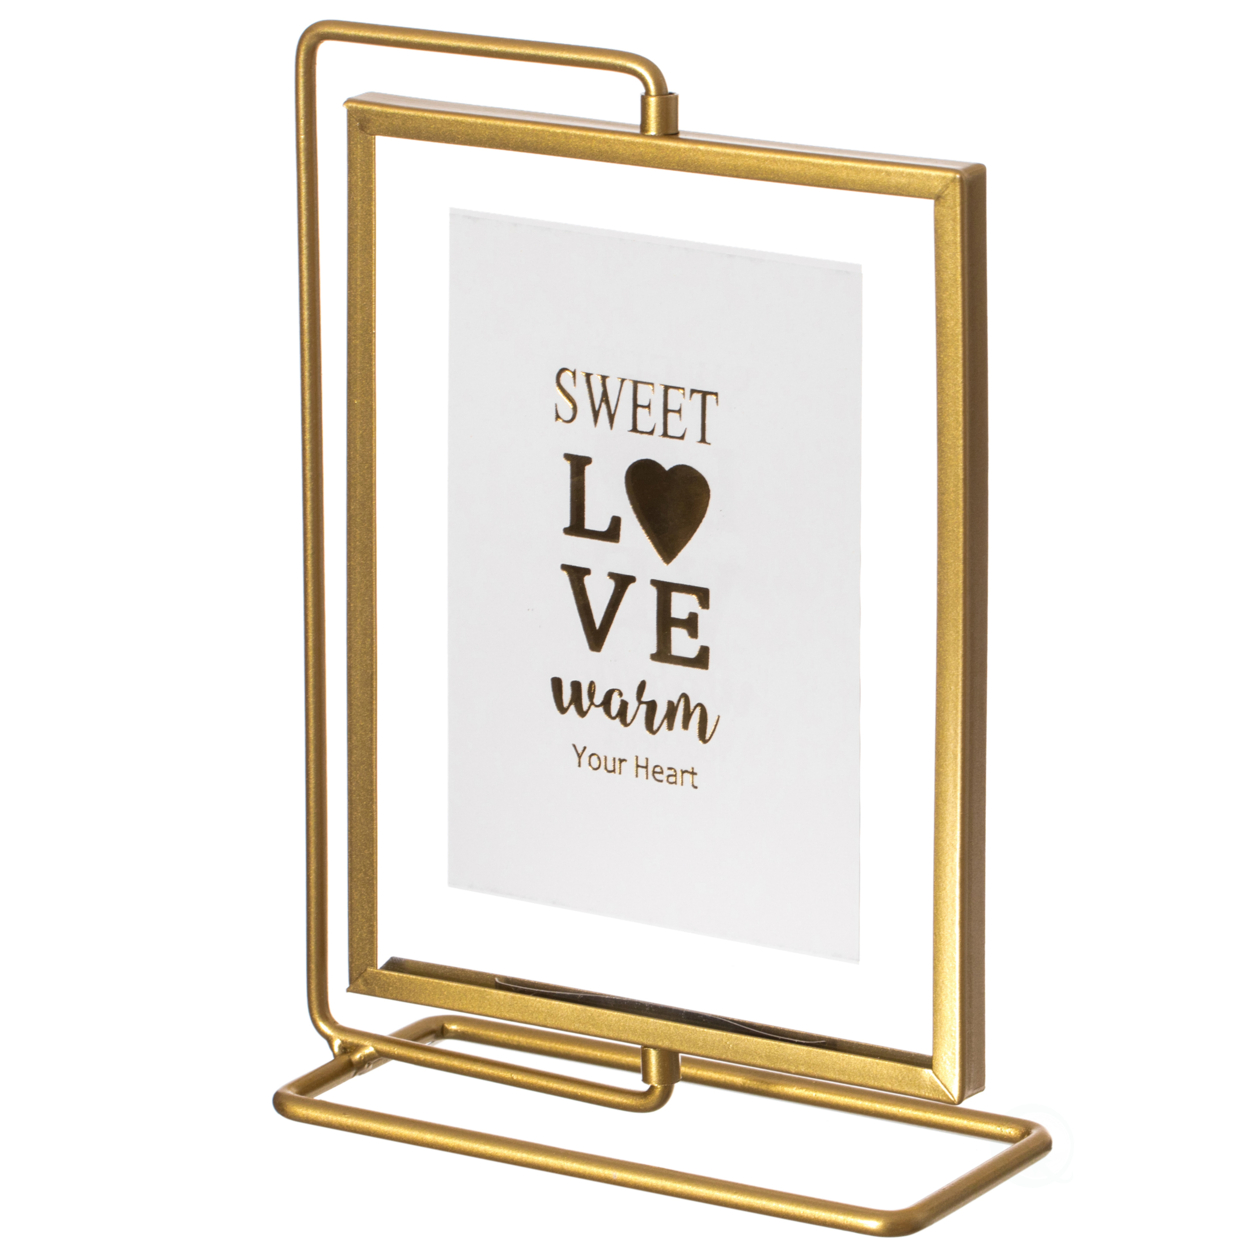 Gold Modern Metal Floating Tabletop Photo Frame With Glass Cover And Glass Cover And Free Spinning Stand - Small